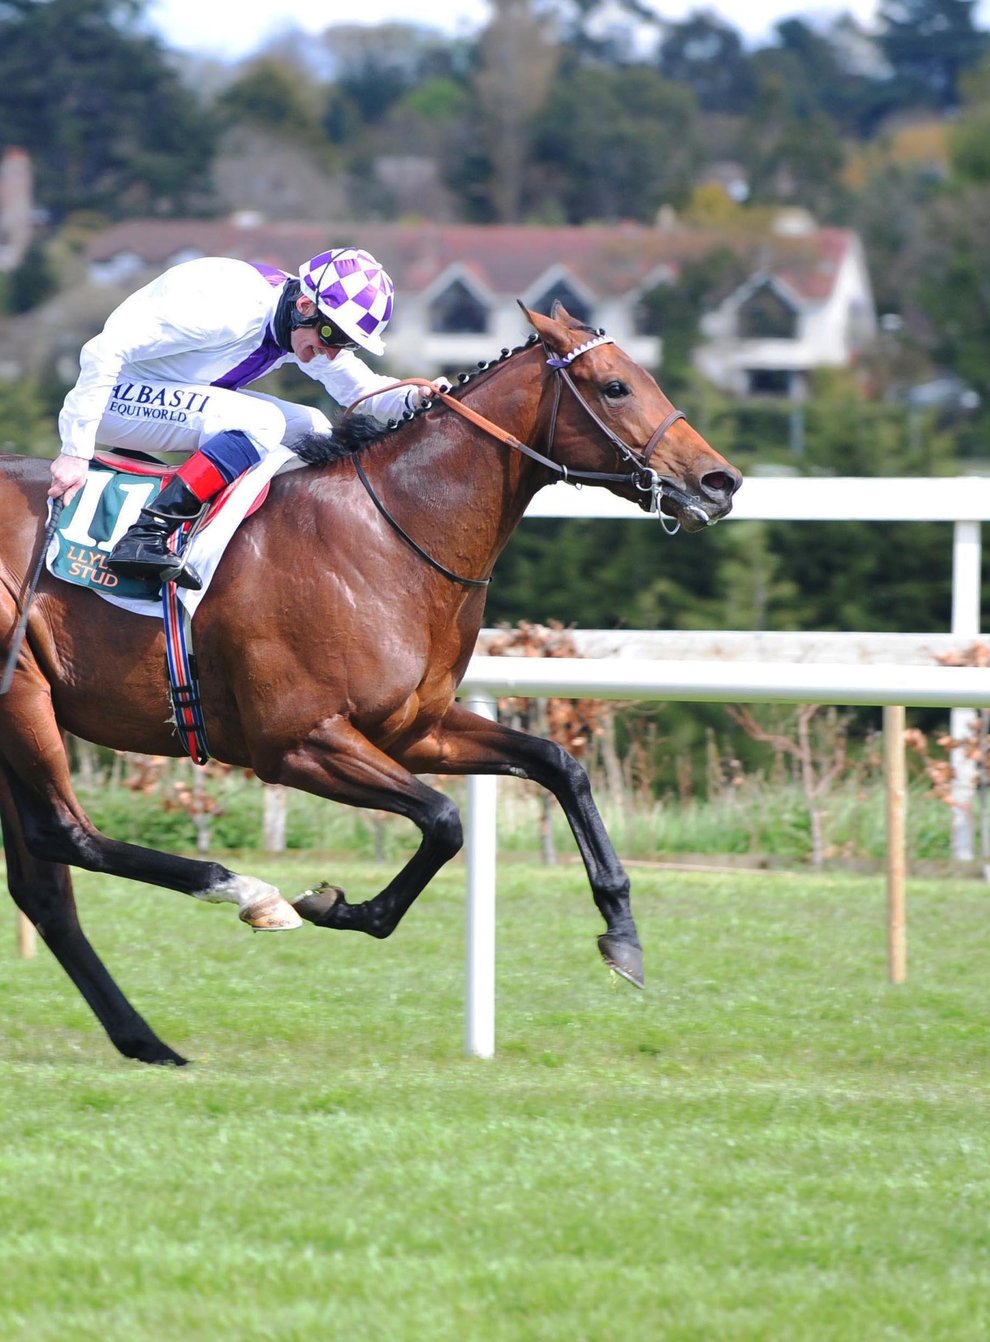 Poetic Flare on his way to victory at Leopardstown